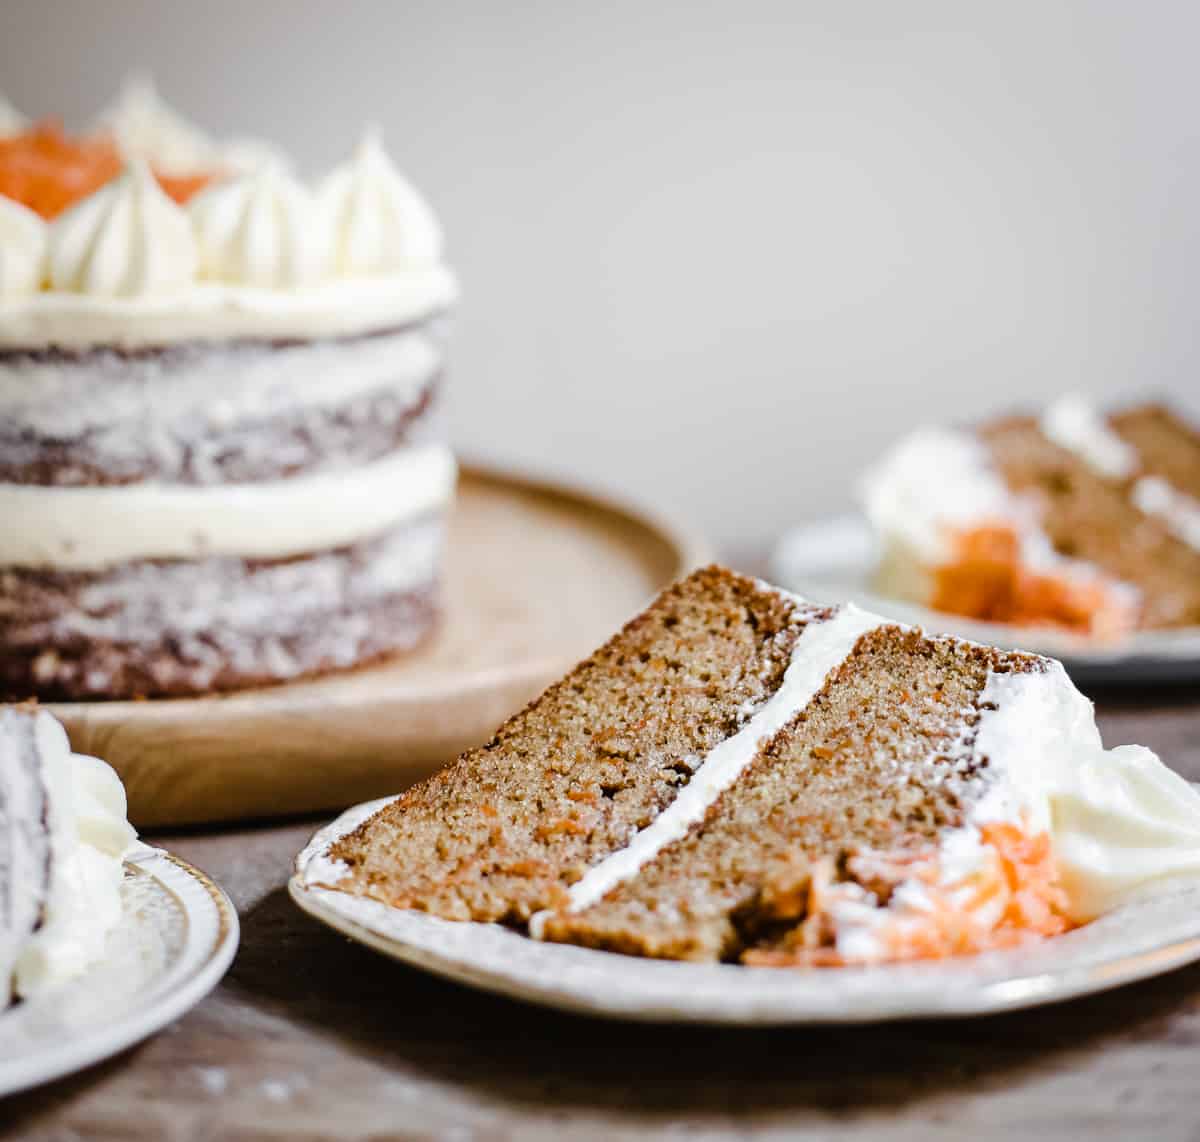 A slice of gluten-free carrot cake on a plate